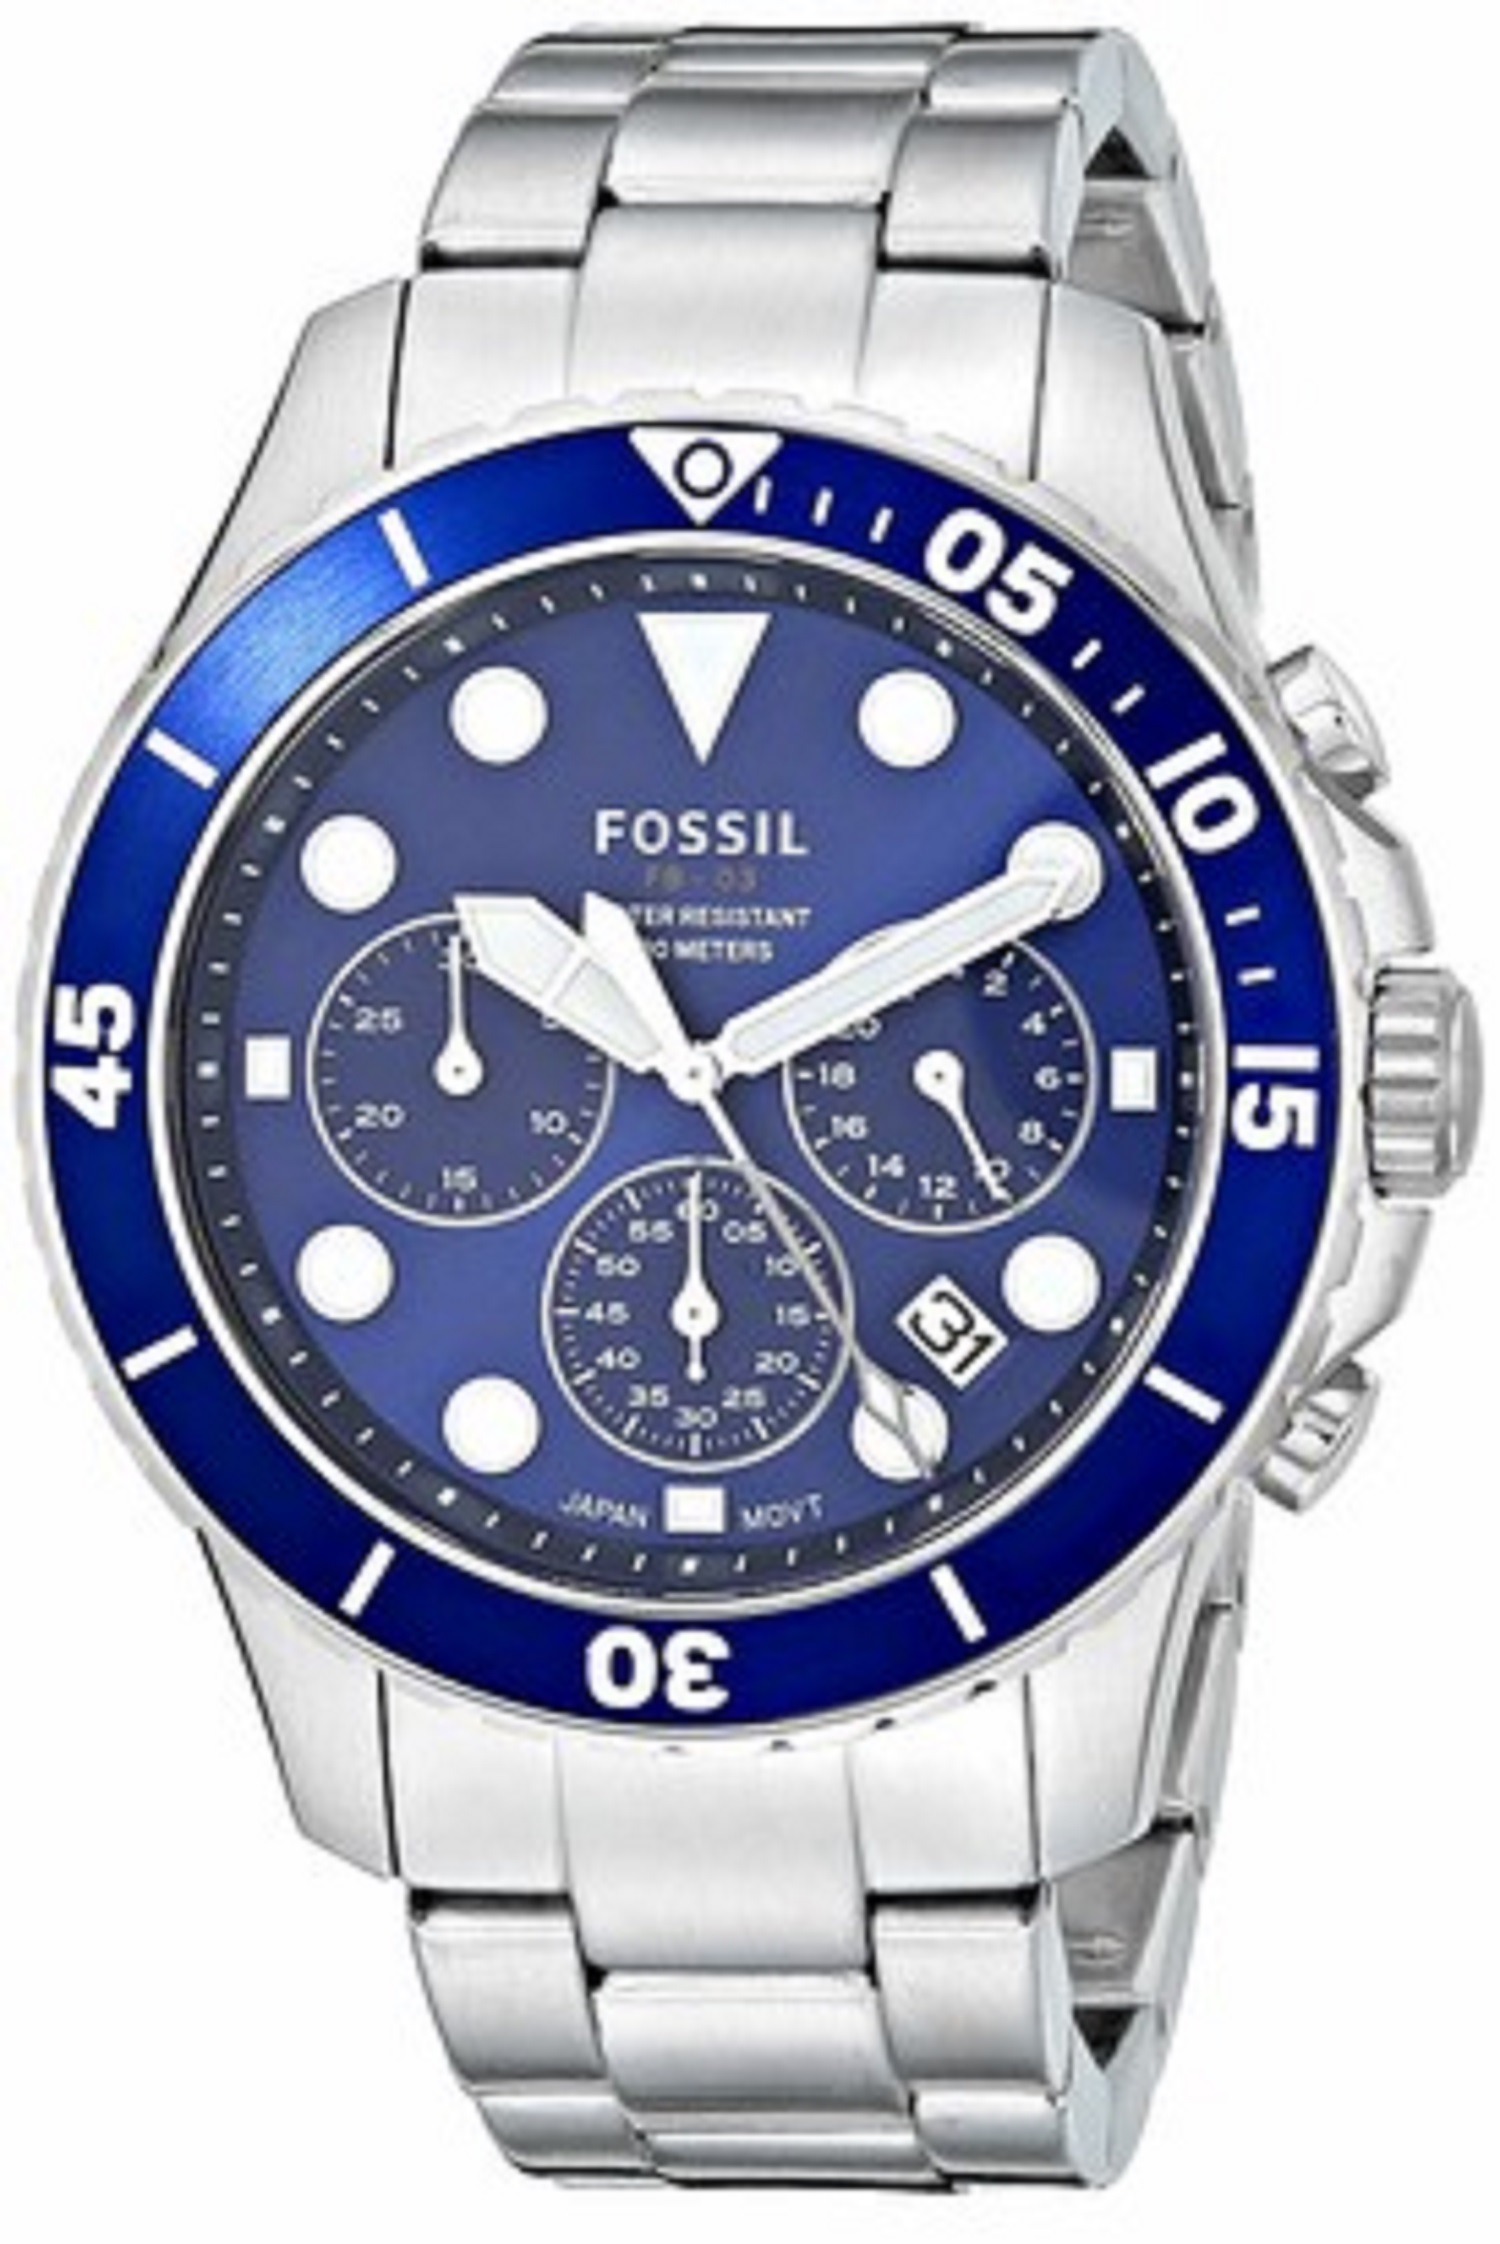 shelter belief When fossil silver watch blue face somersault ...